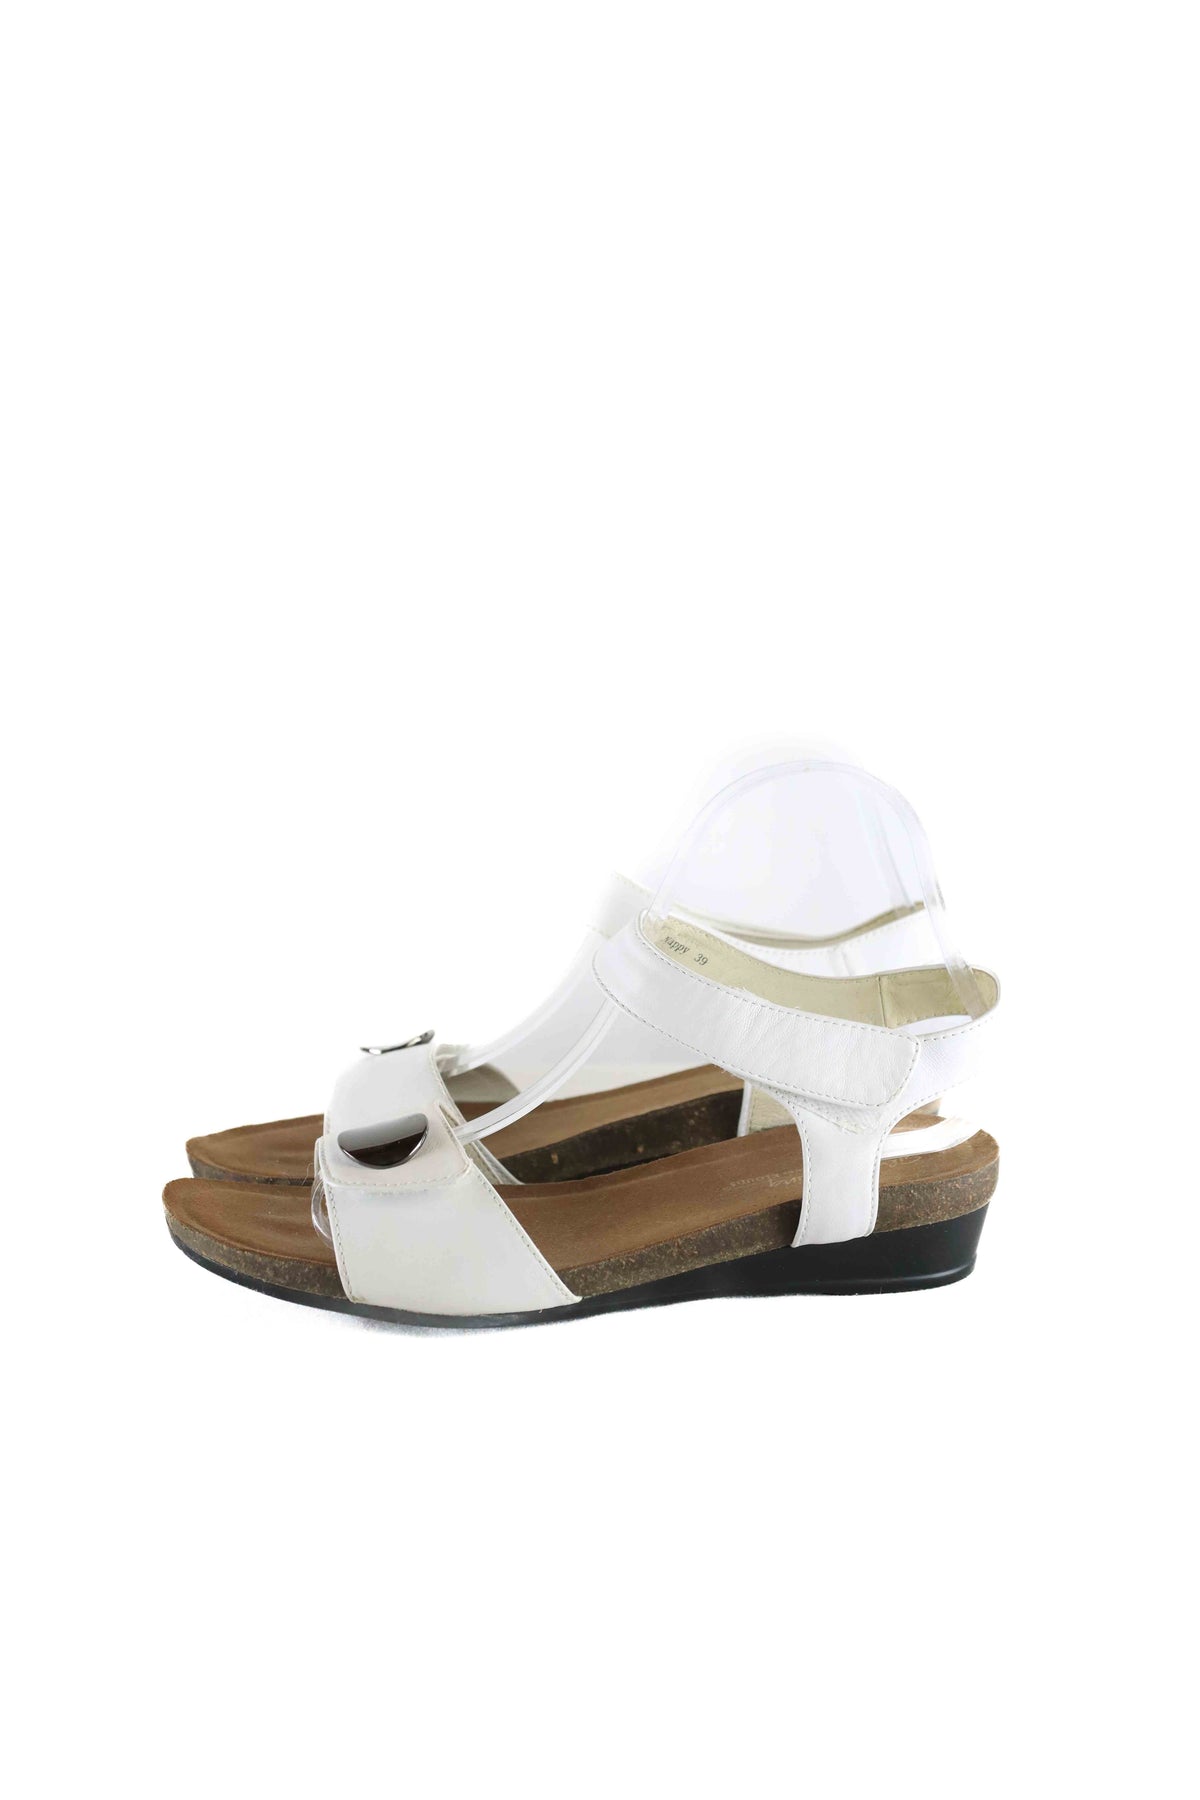 Silver Lining White Sandals 39